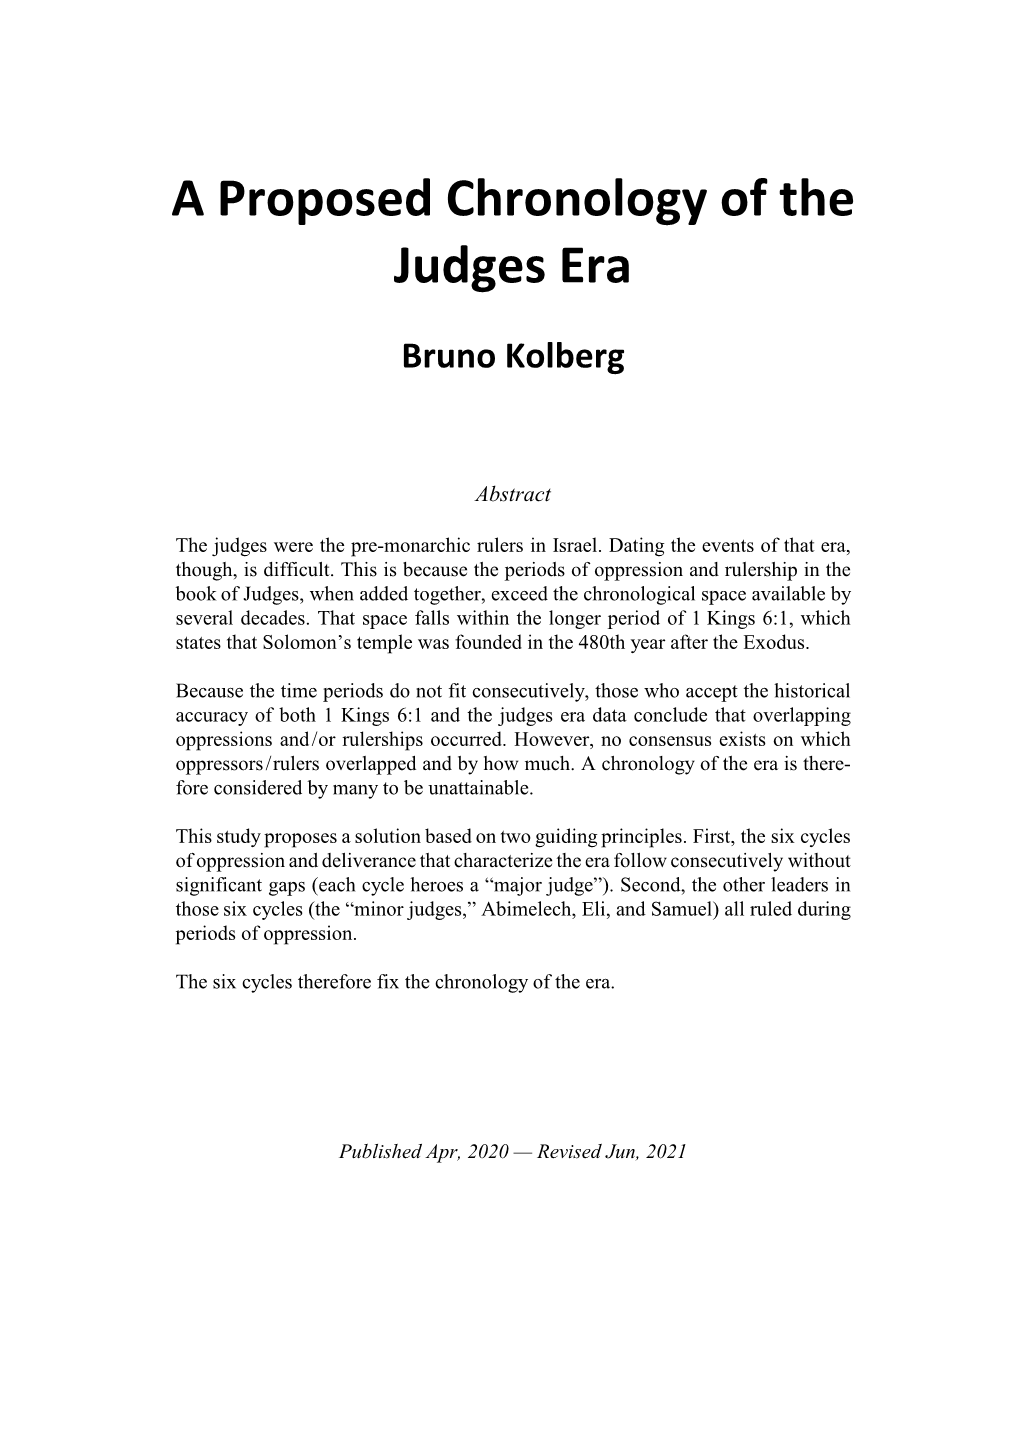 A Proposed Chronology of the Judges Era